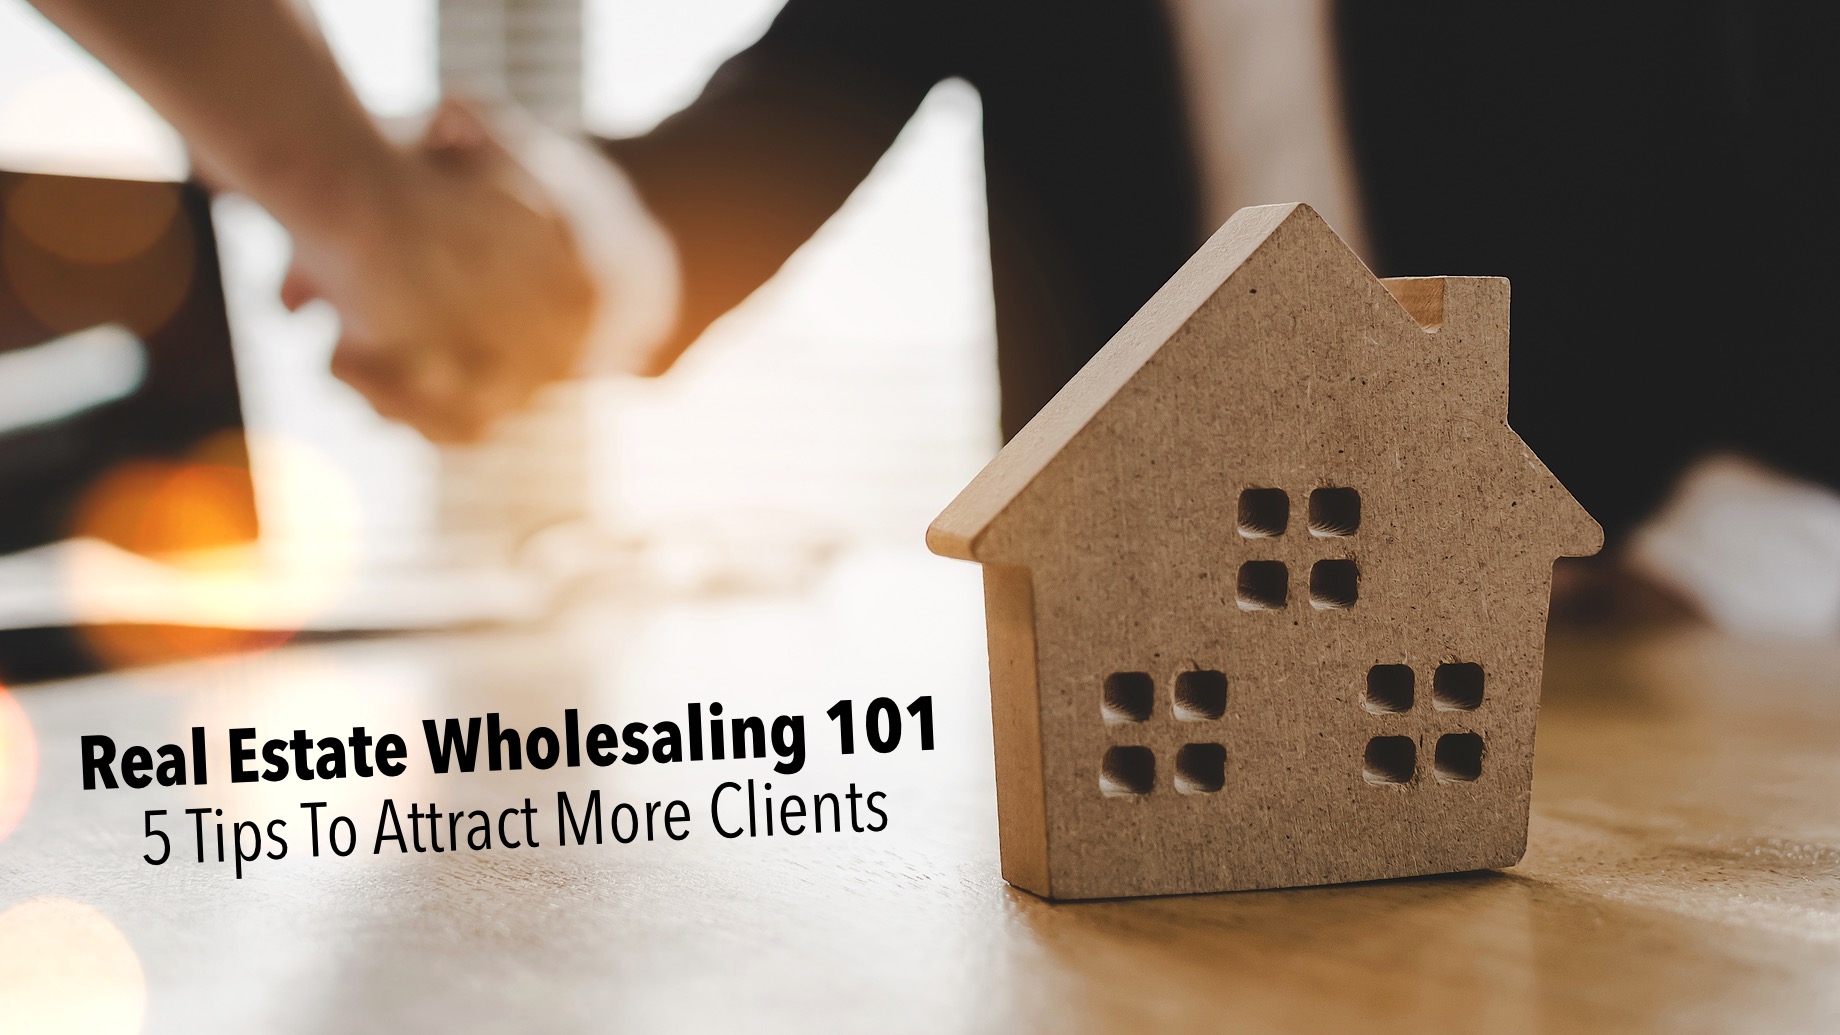 Real Estate Wholesaling 101 - 5 Tips To Attract More Clients